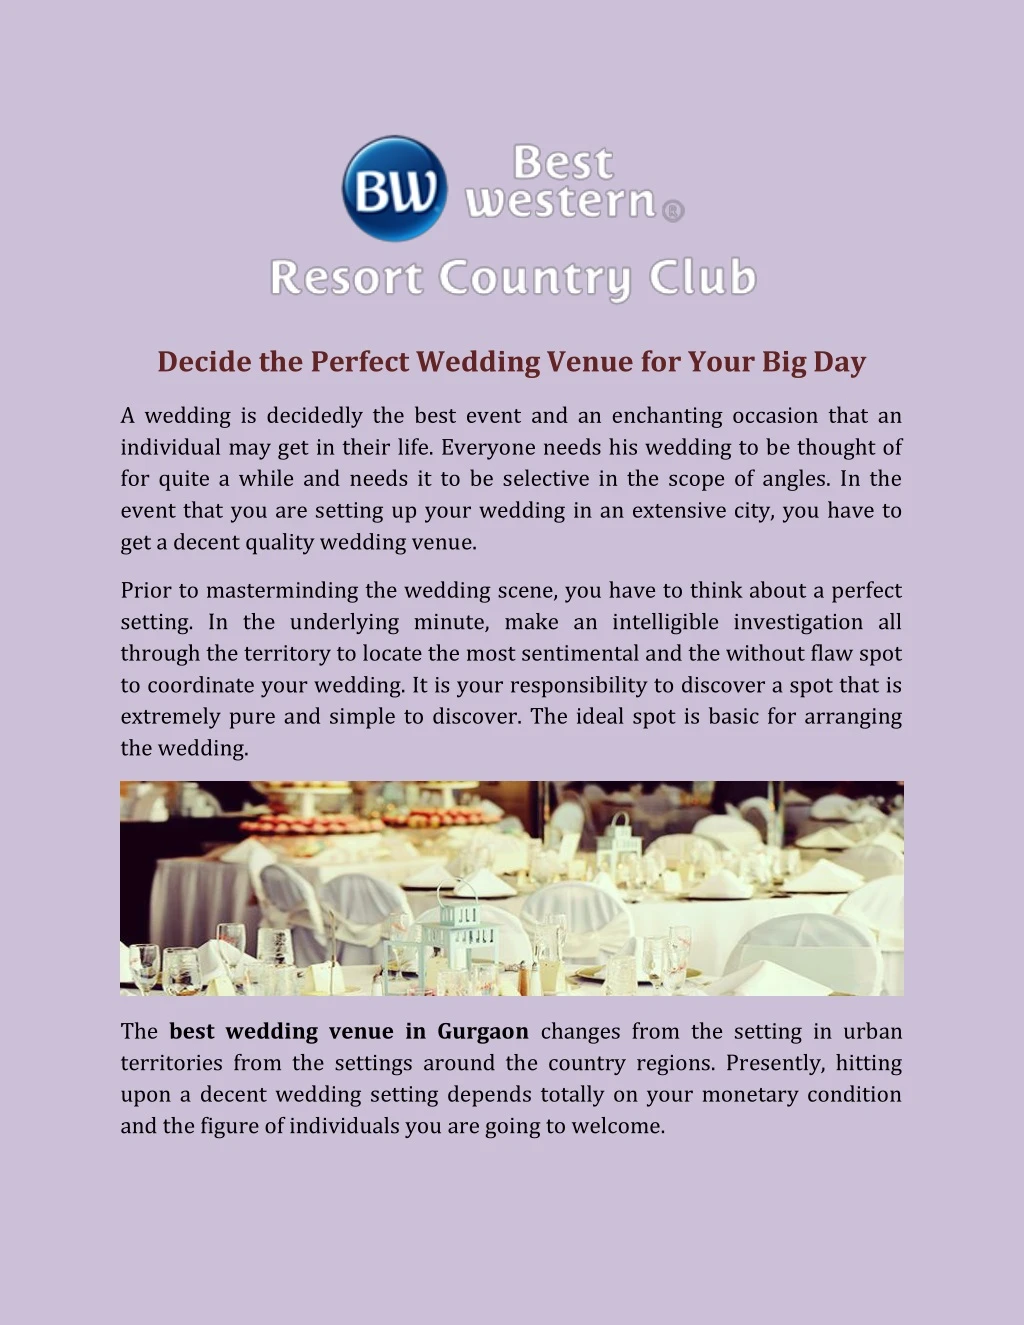 decide the perfect wedding venue for your big day